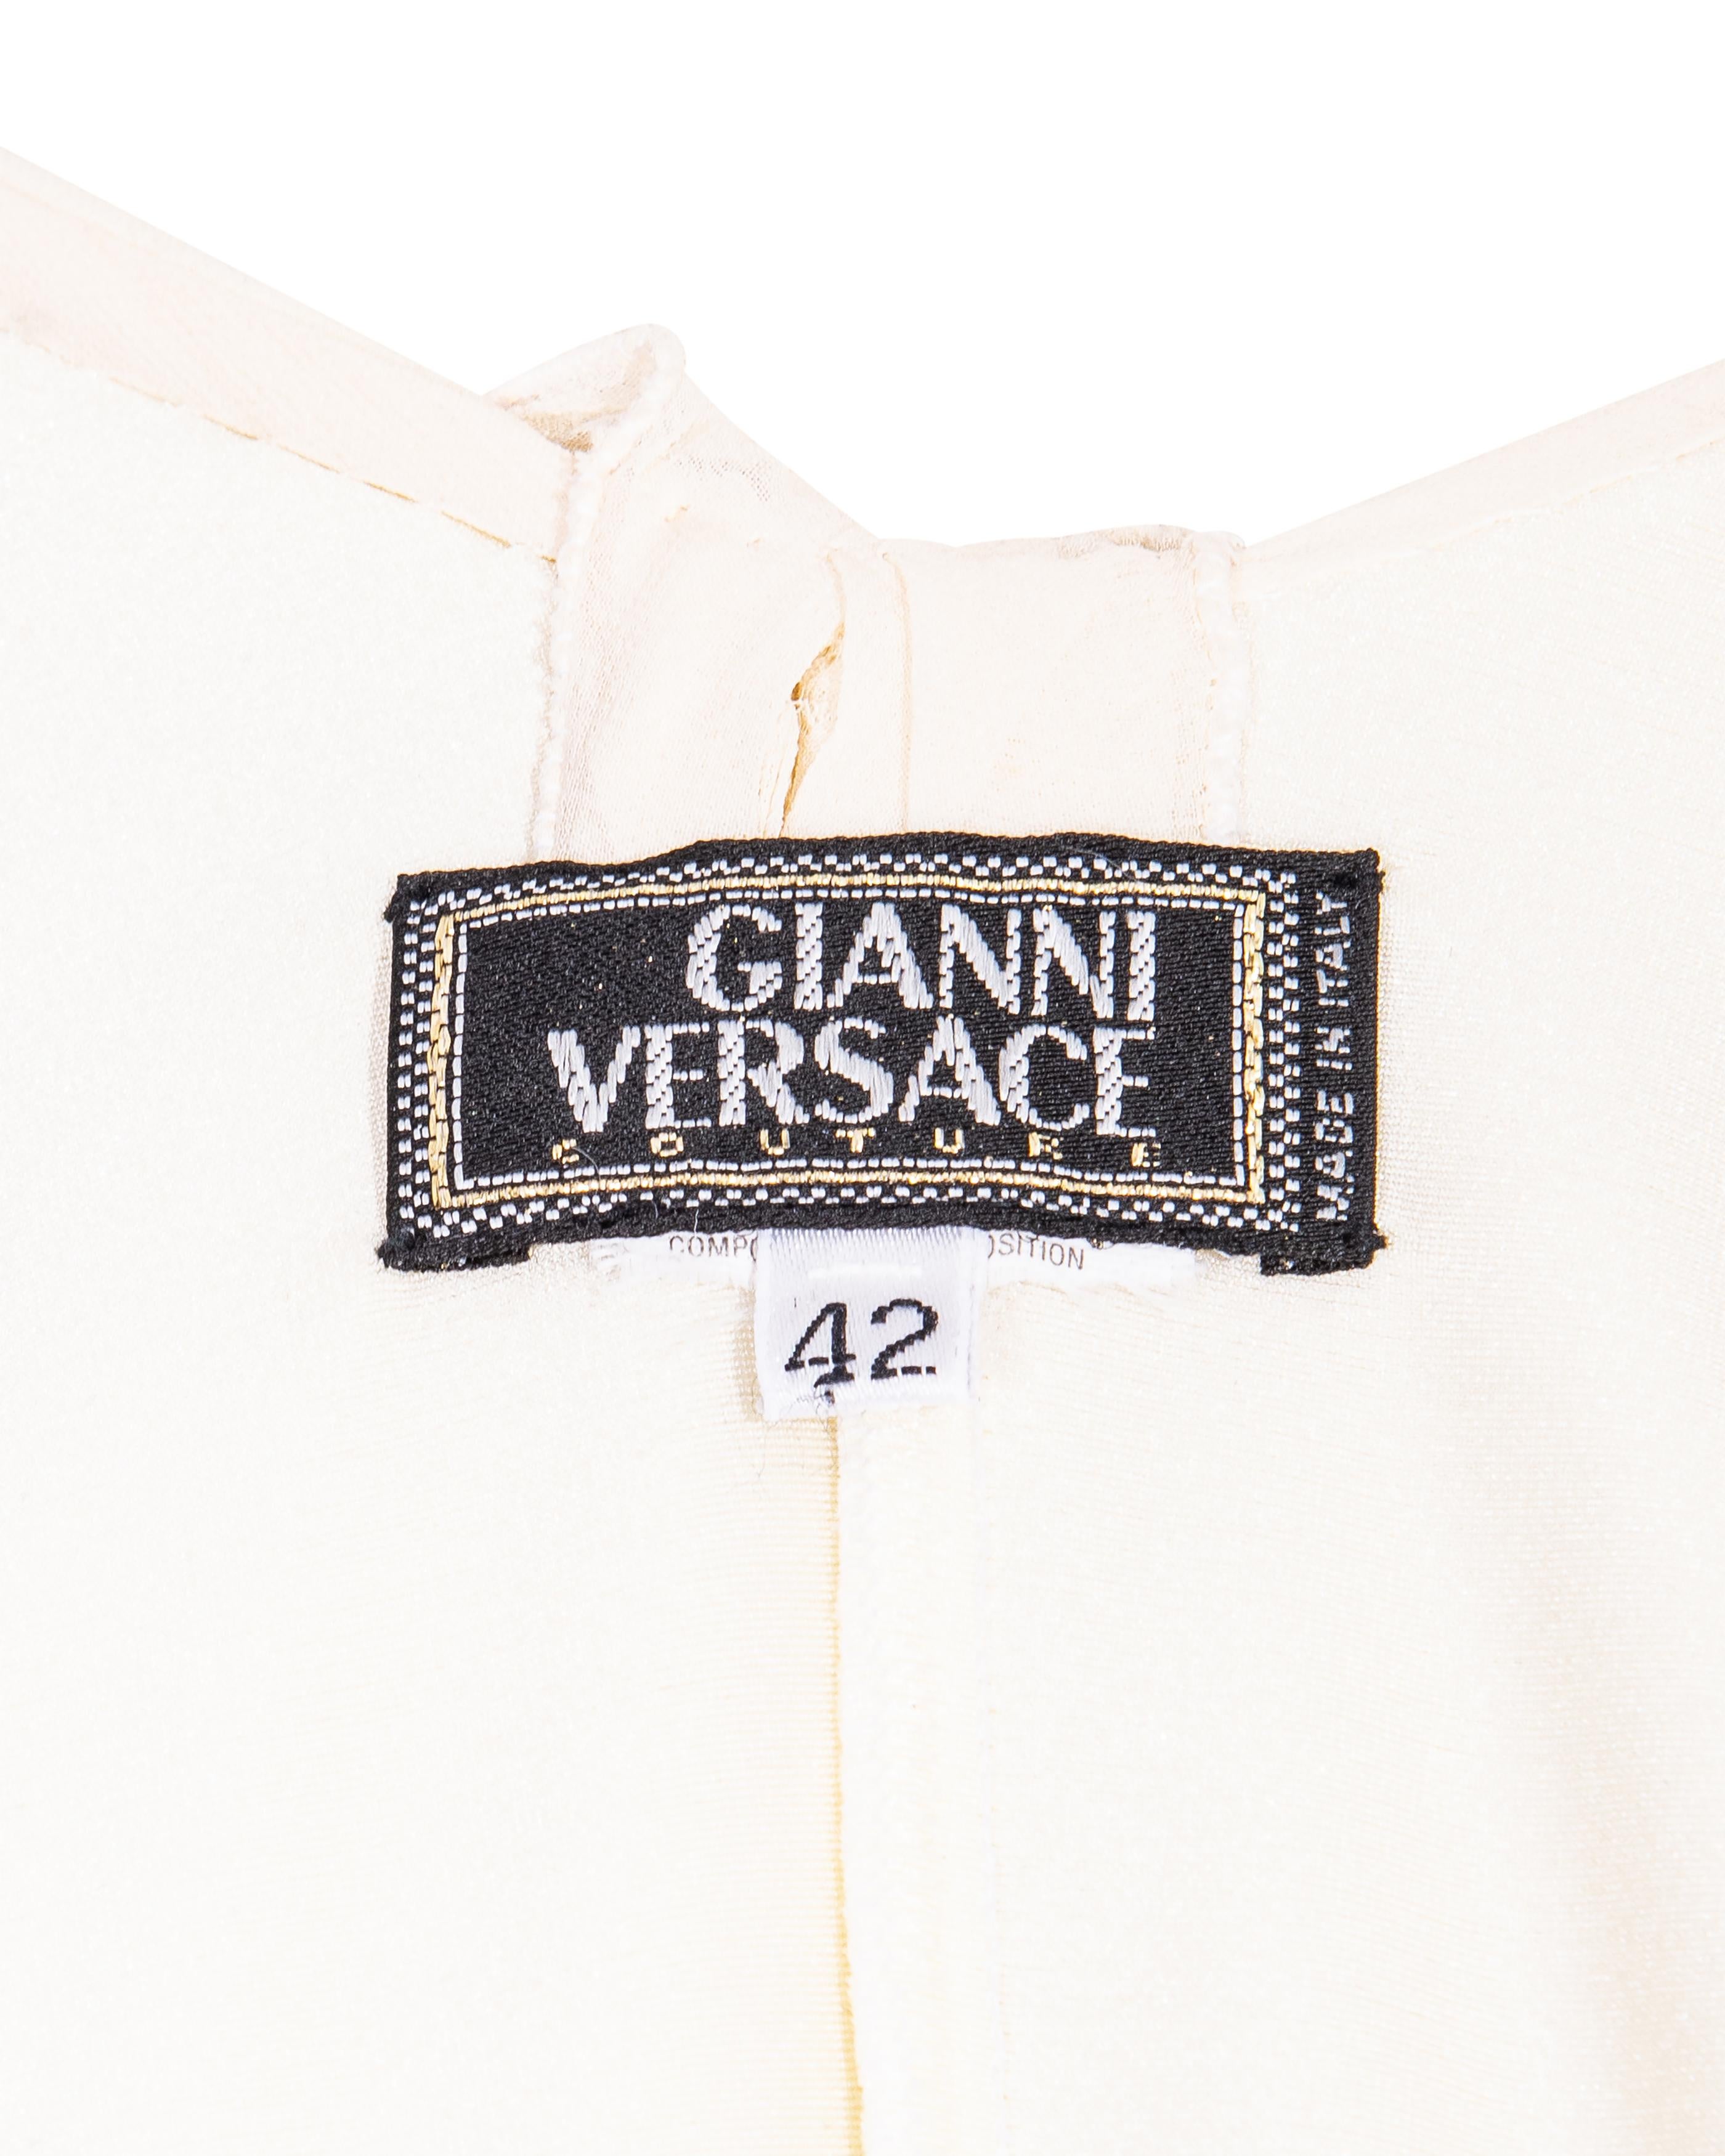 S/S 1995 Gianni Versace Couture Silk Chiffon Drape Front Gown 9